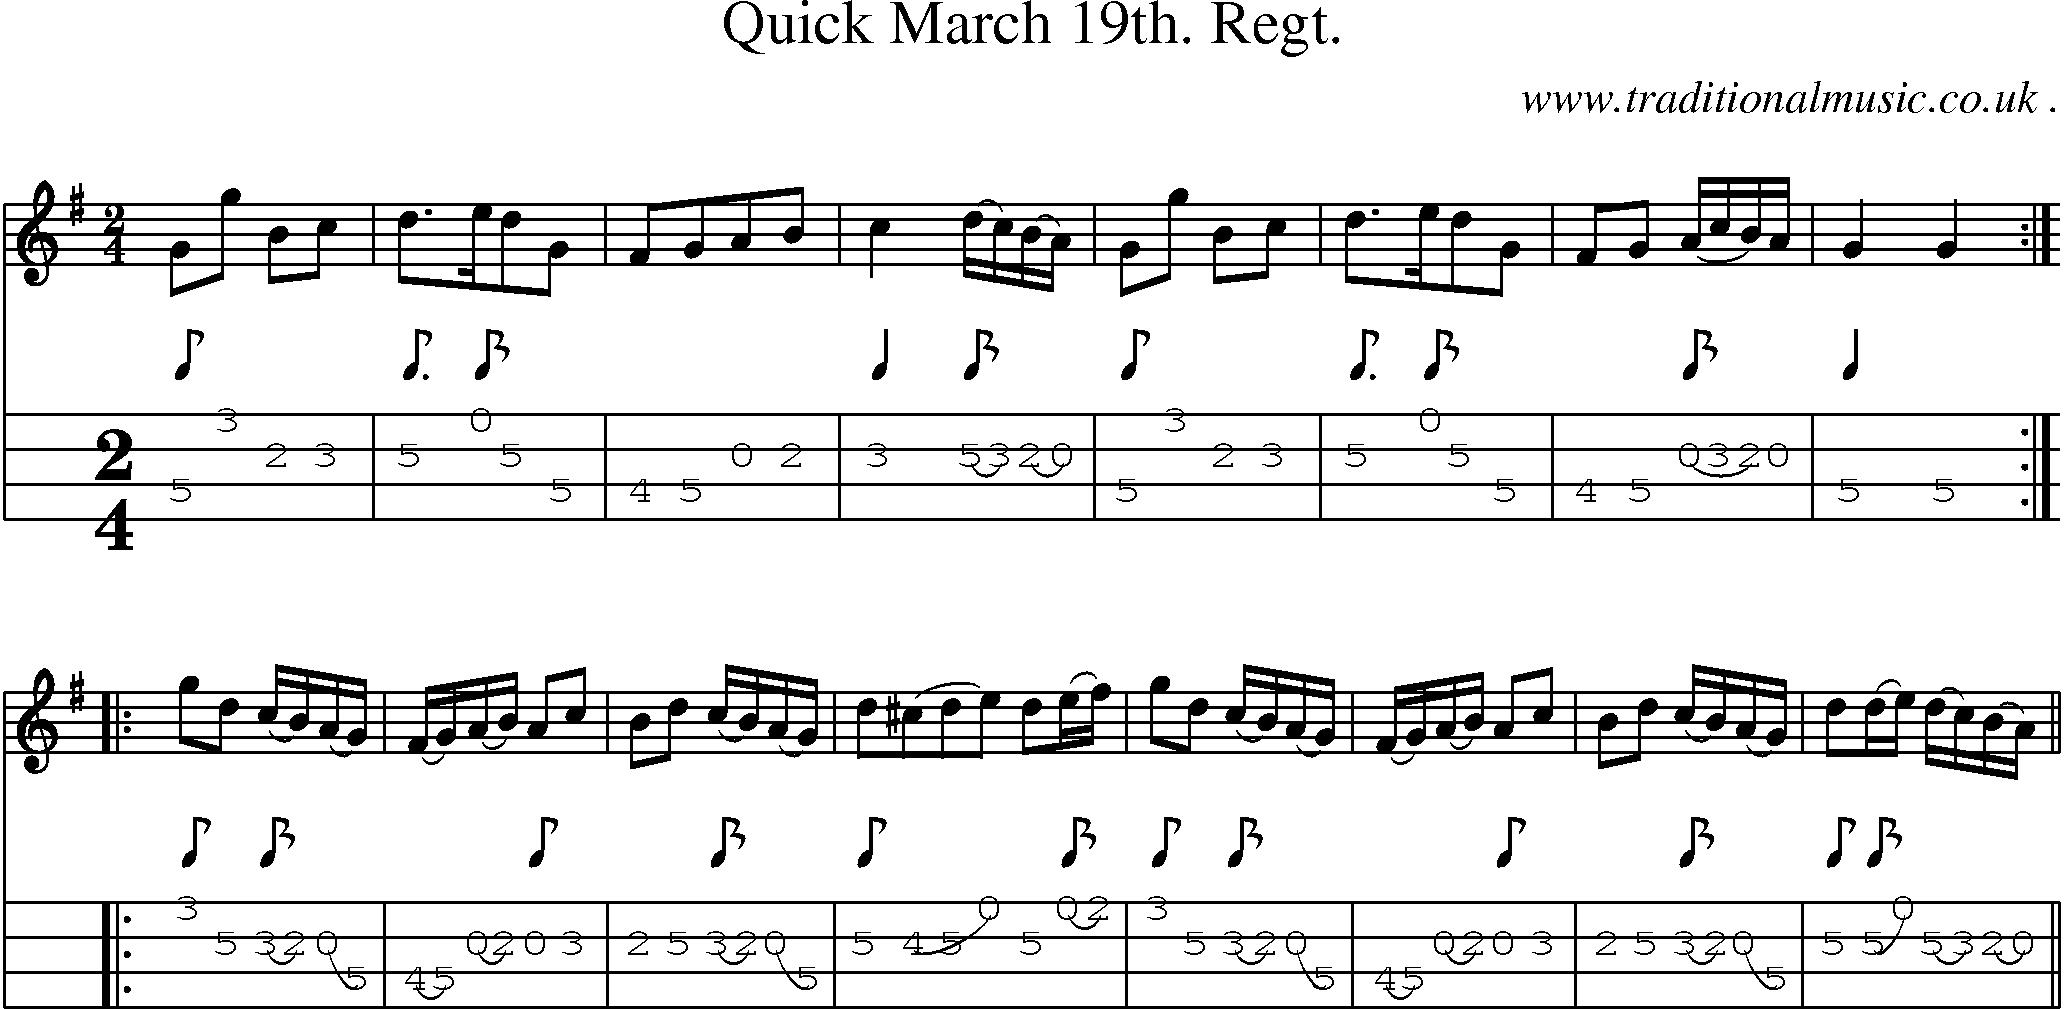 Sheet-Music and Mandolin Tabs for Quick March 19th Regt